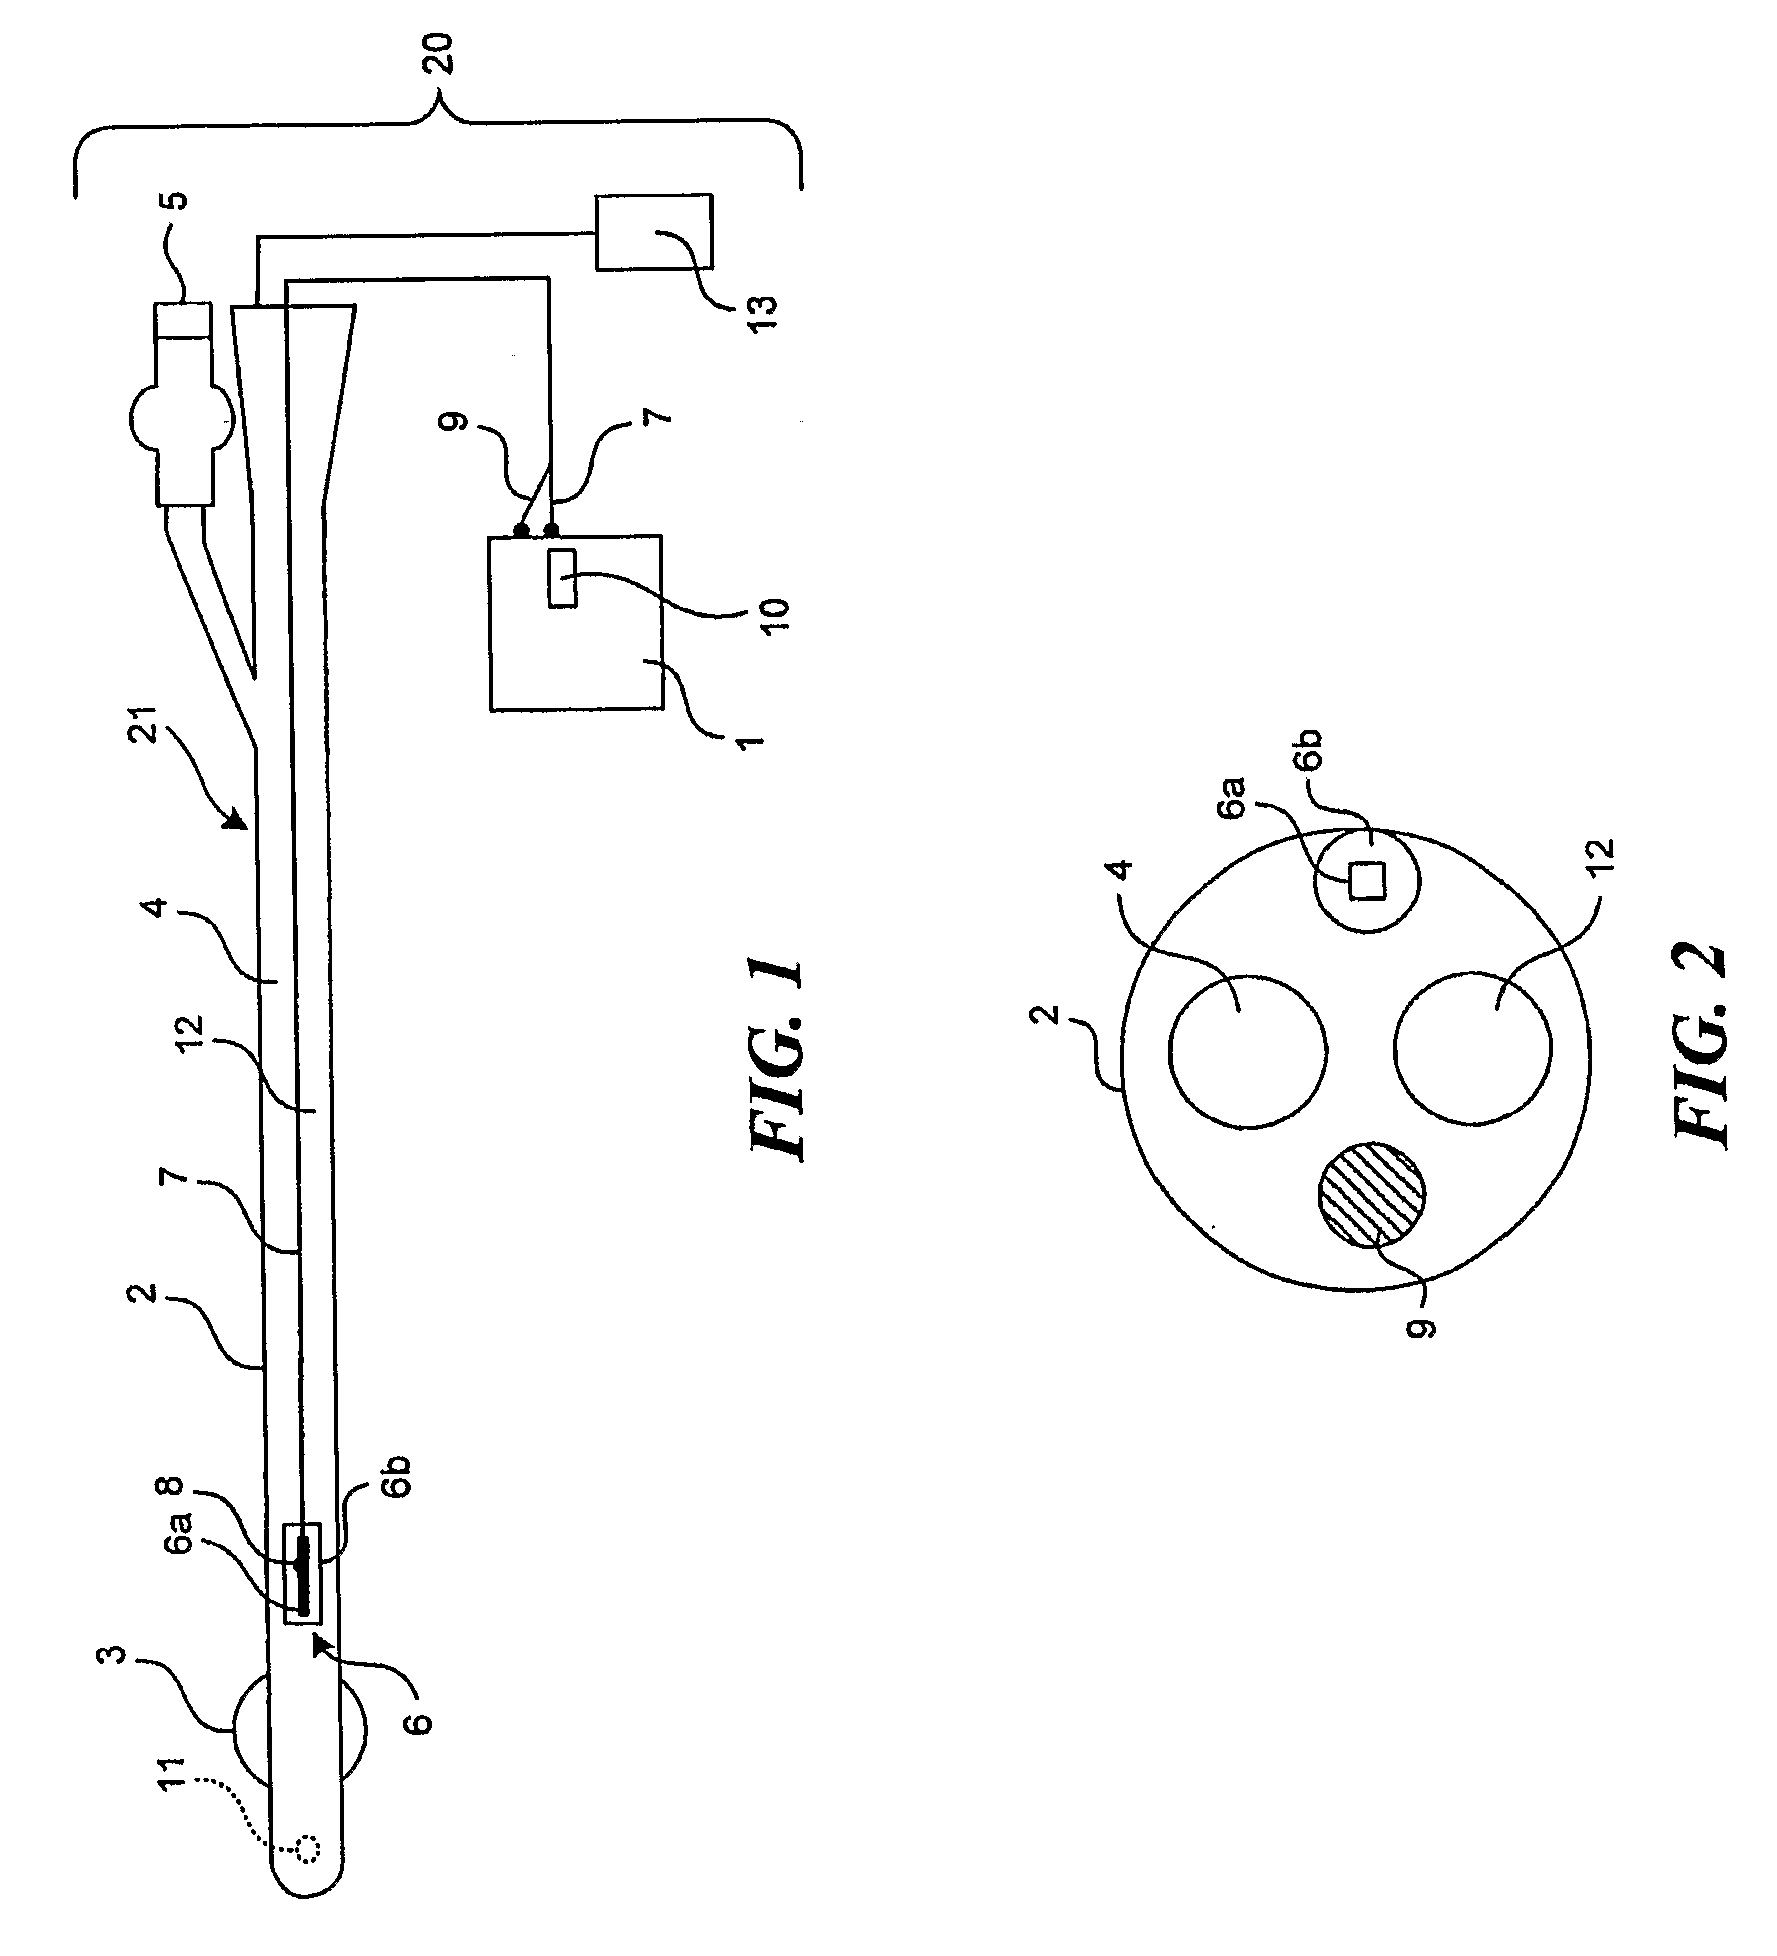 Method and apparatus for light-activated drug therapy